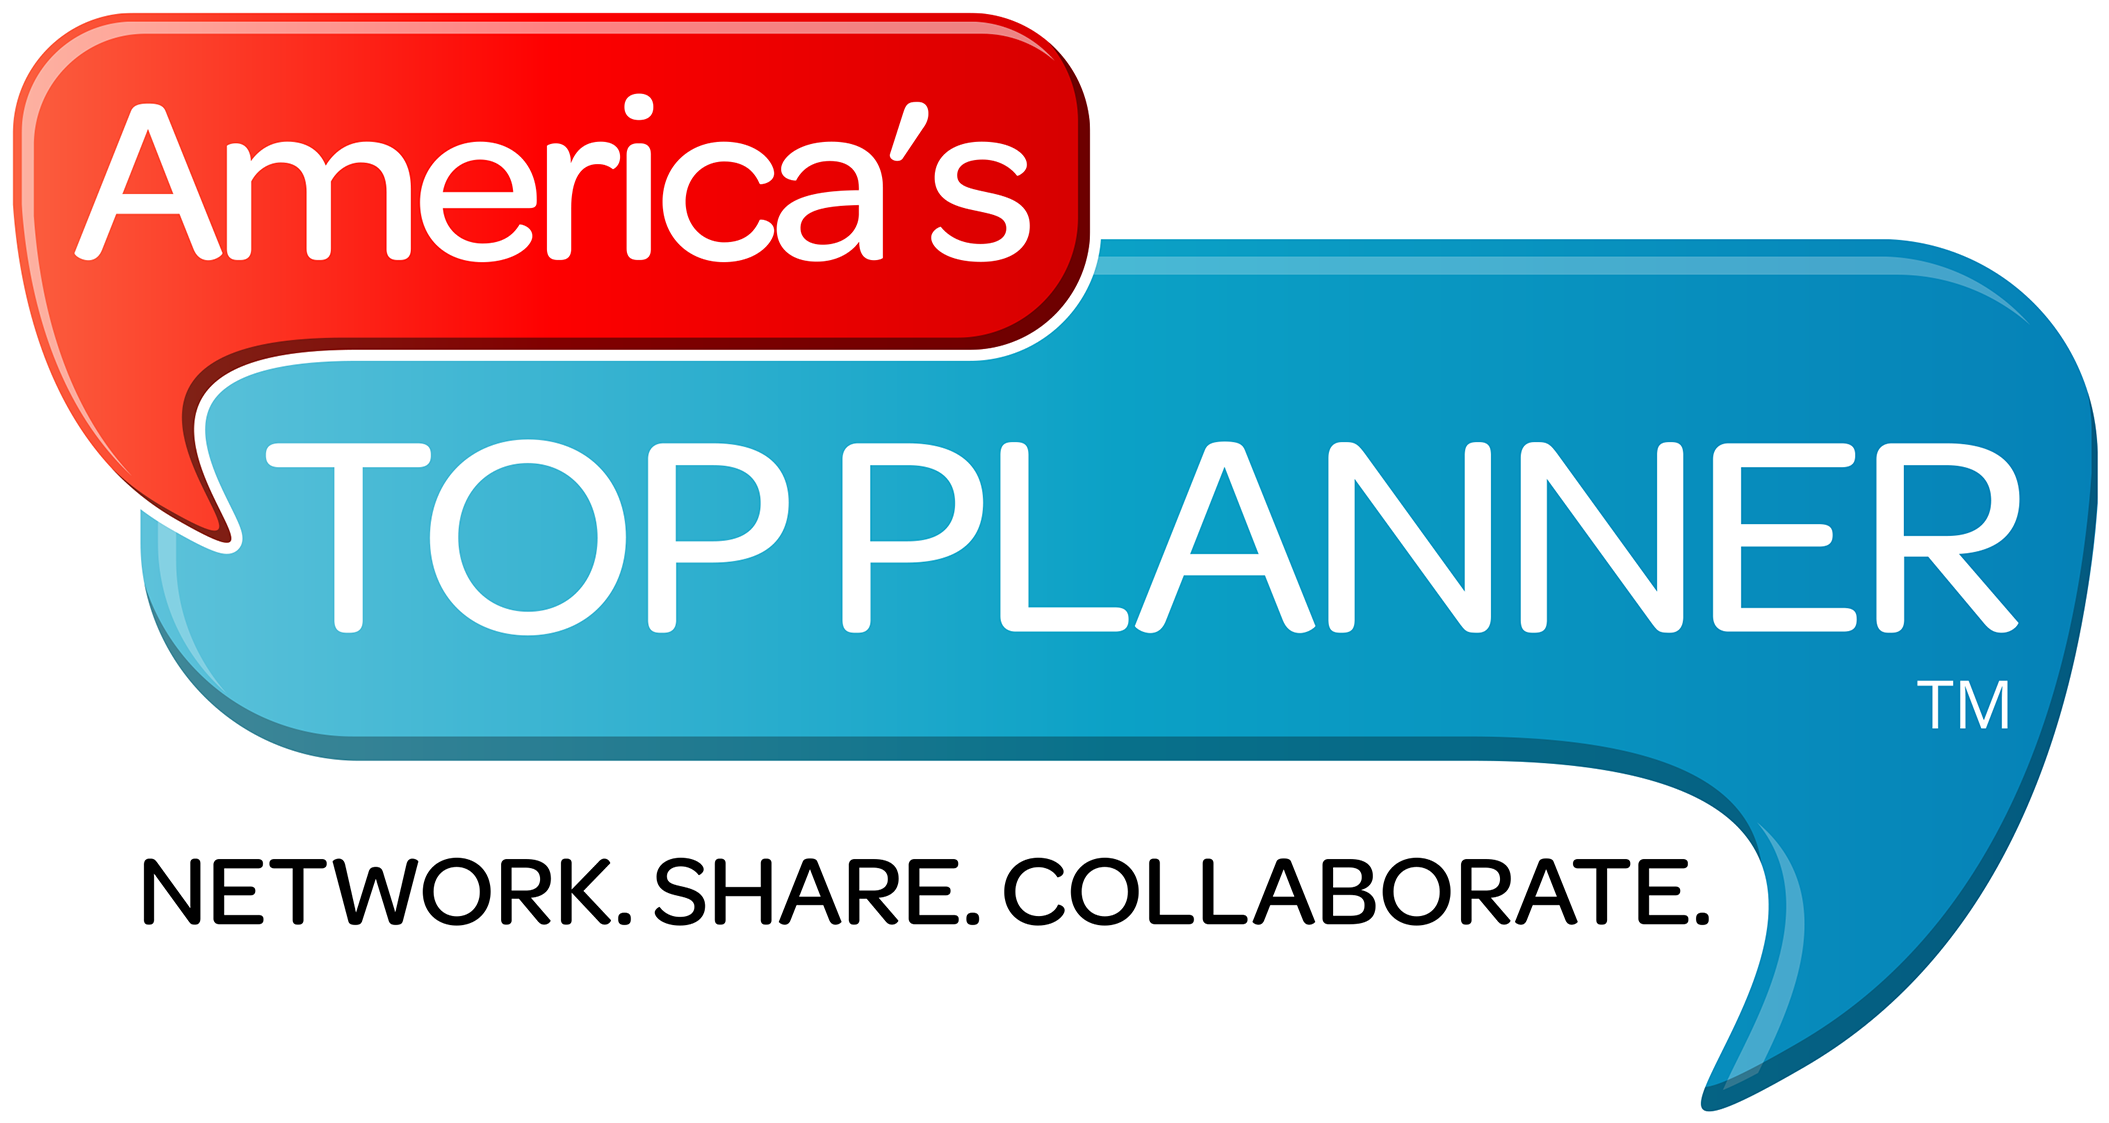 Home Based Business Ideas For Wo With Americastopplannerevent - United States Of America (2127x1127)